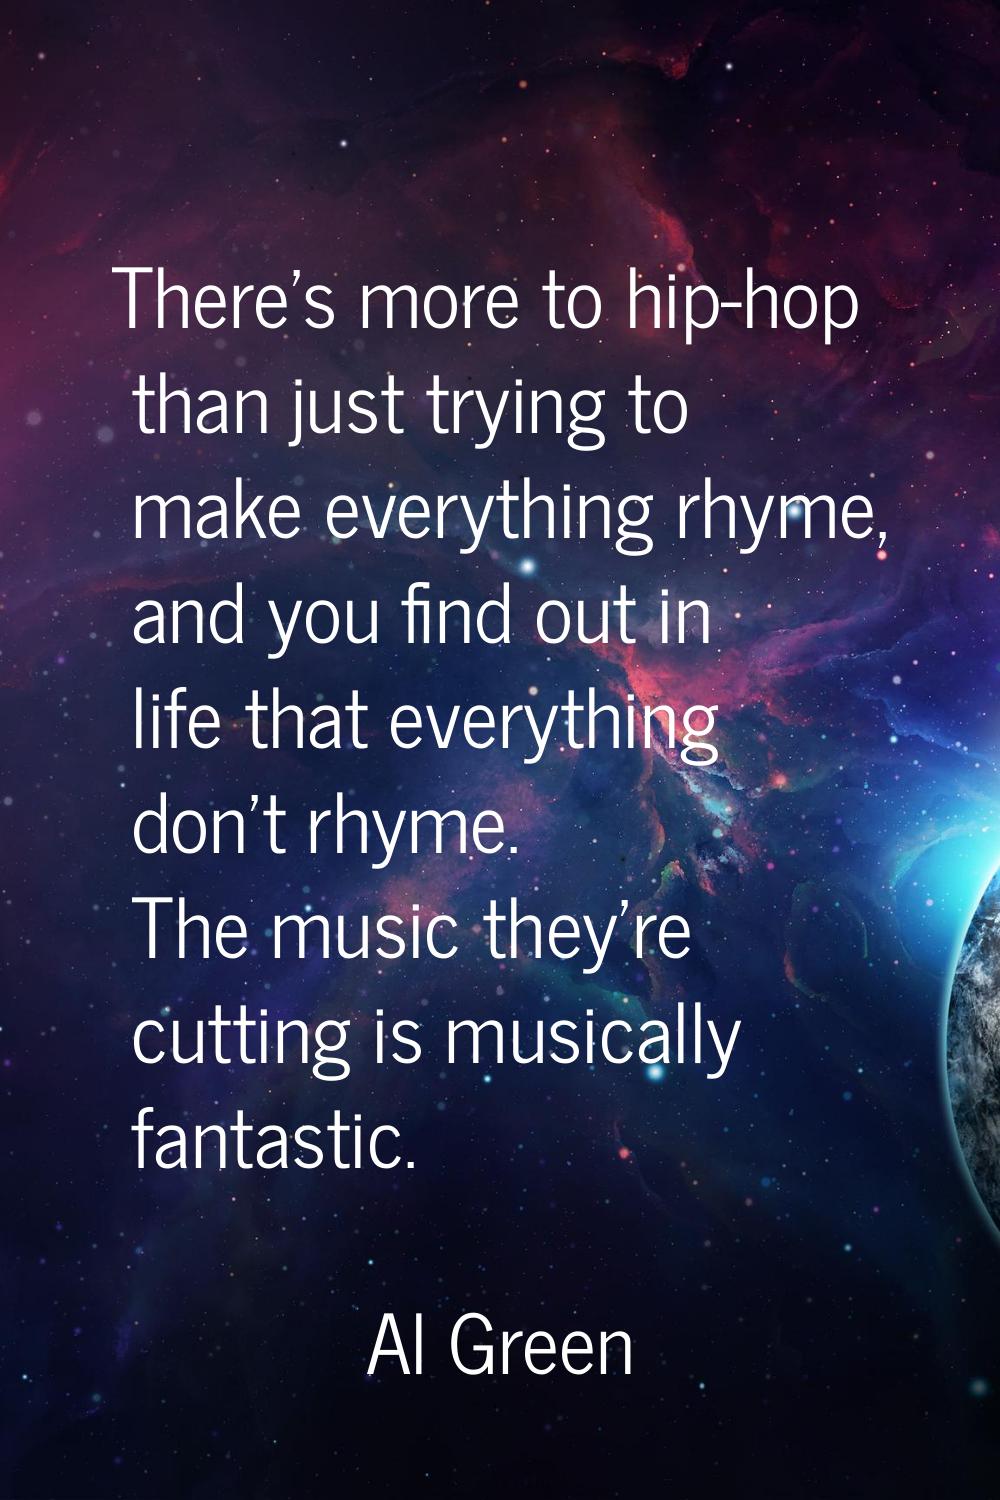 There's more to hip-hop than just trying to make everything rhyme, and you find out in life that ev